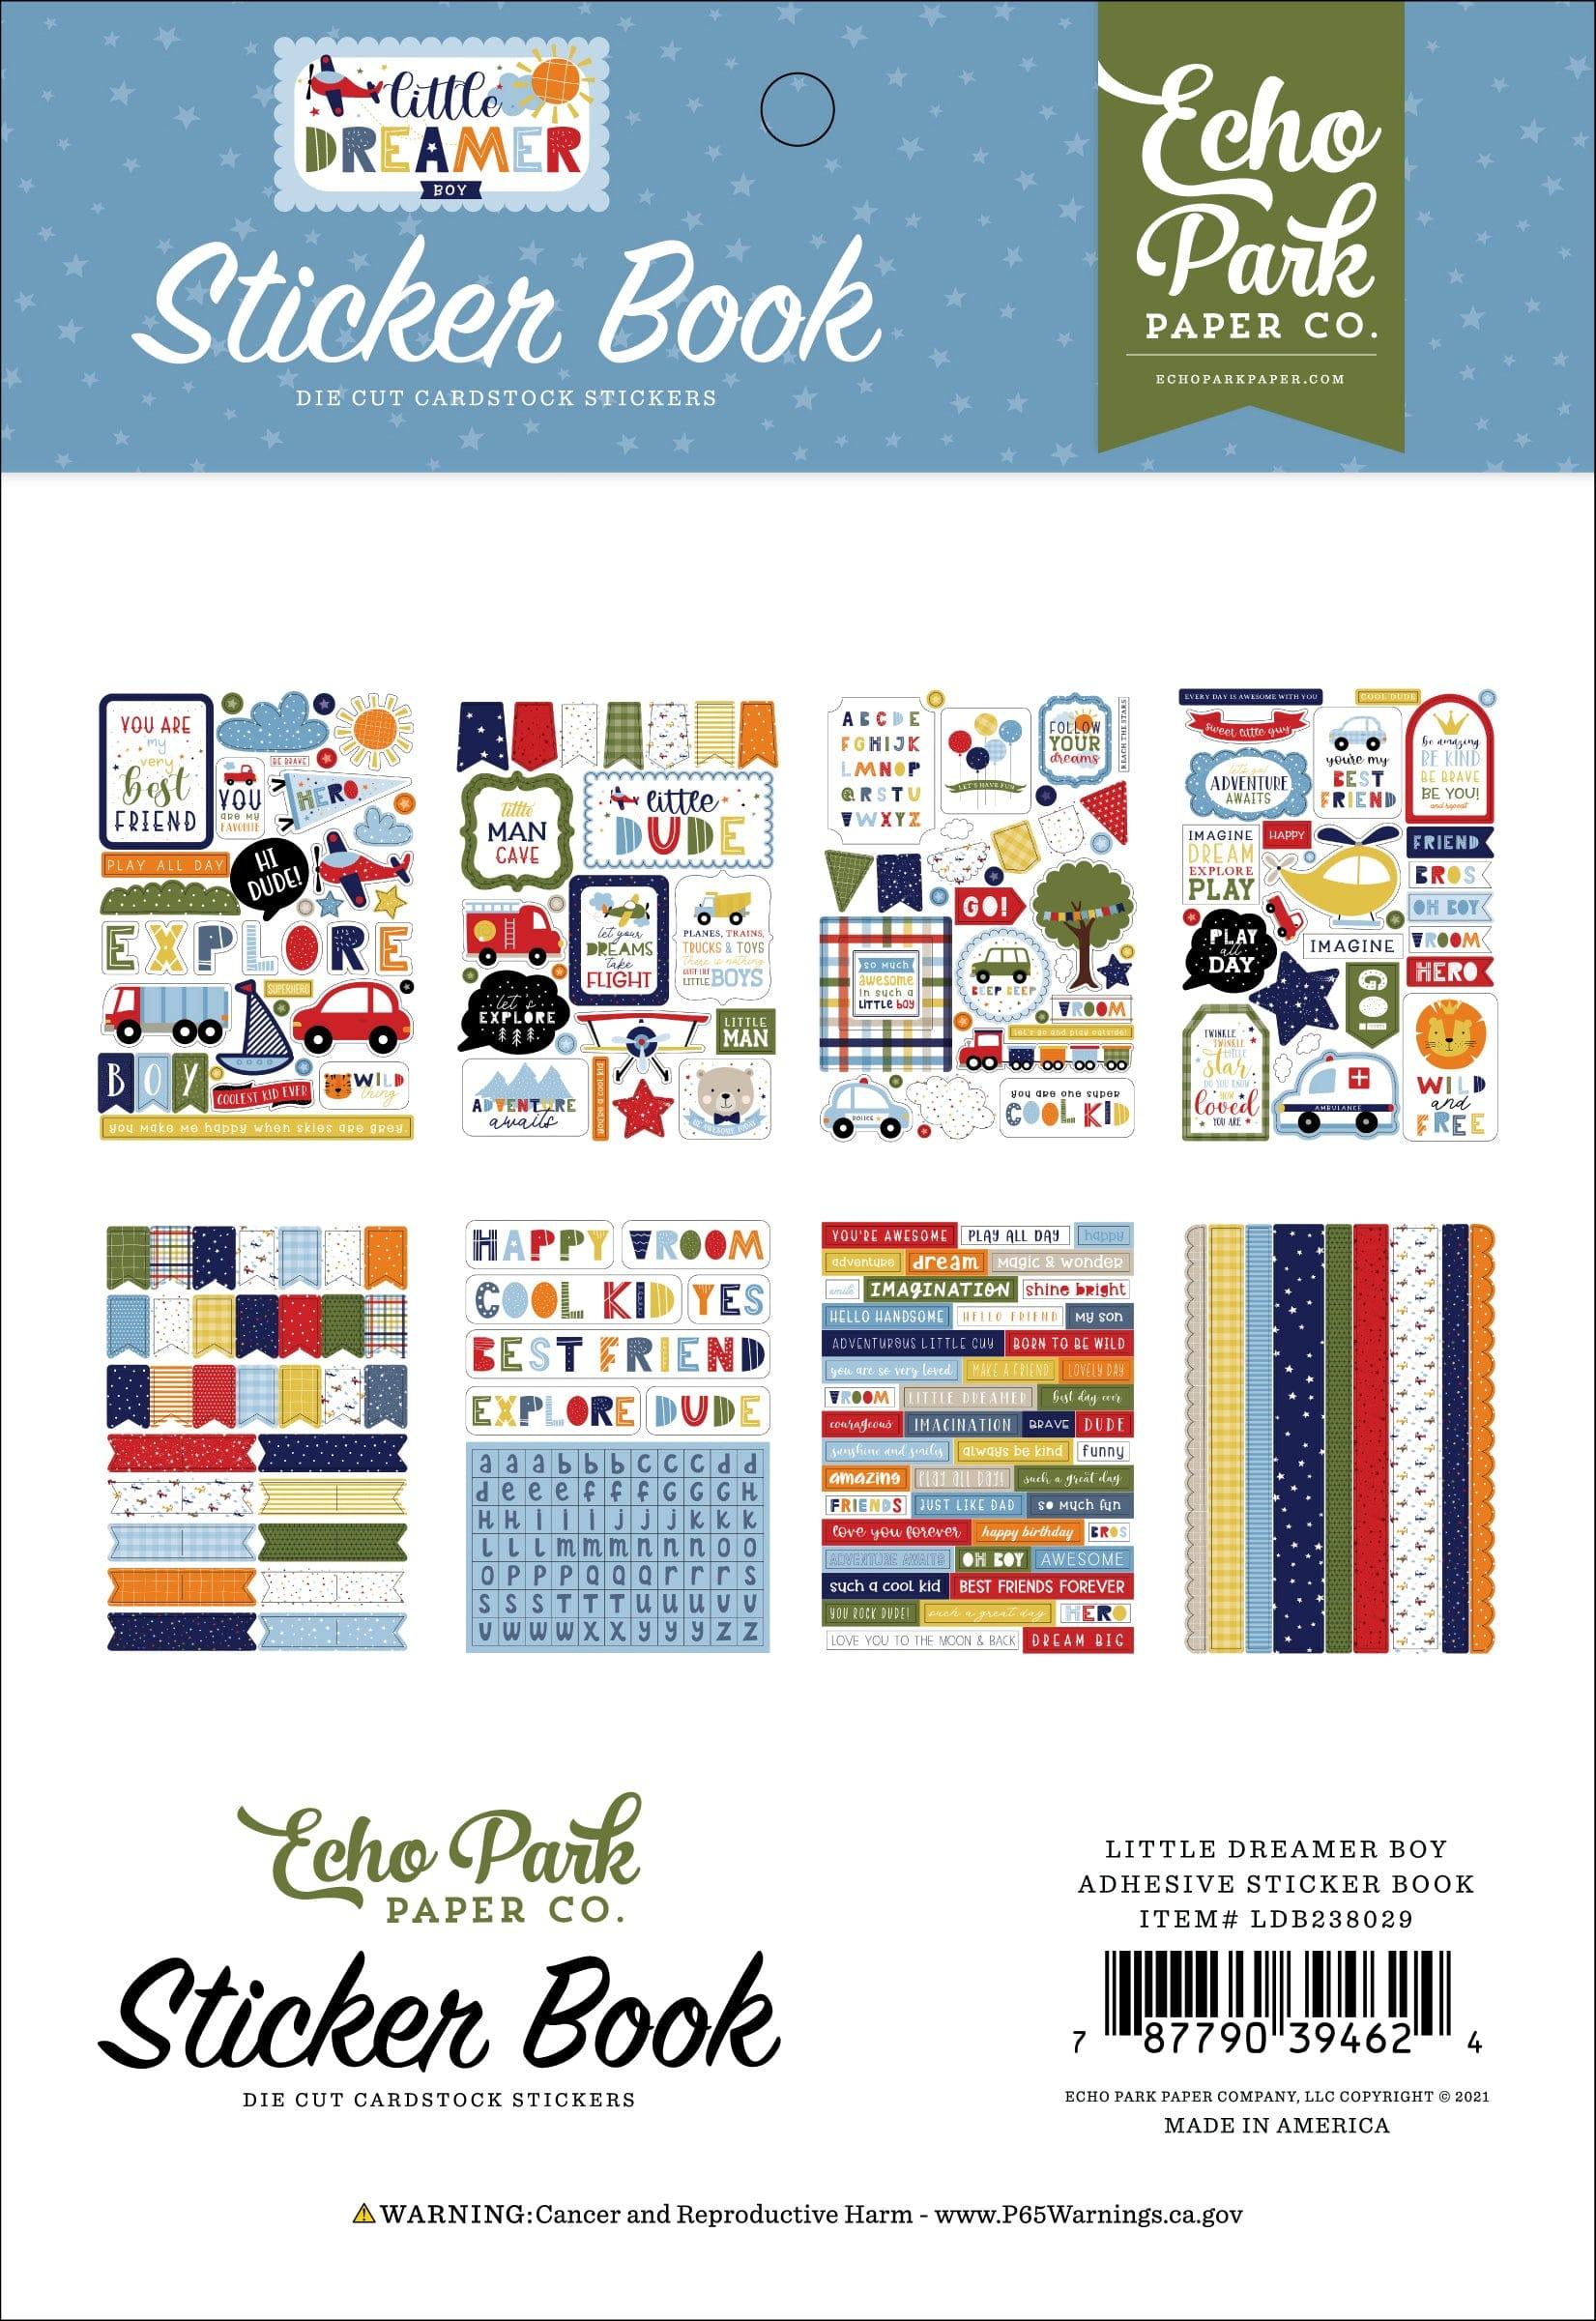 Little Dreamer Boy Collection Sticker Book by Echo Park Paper-16 pages - Scrapbook Supply Companies